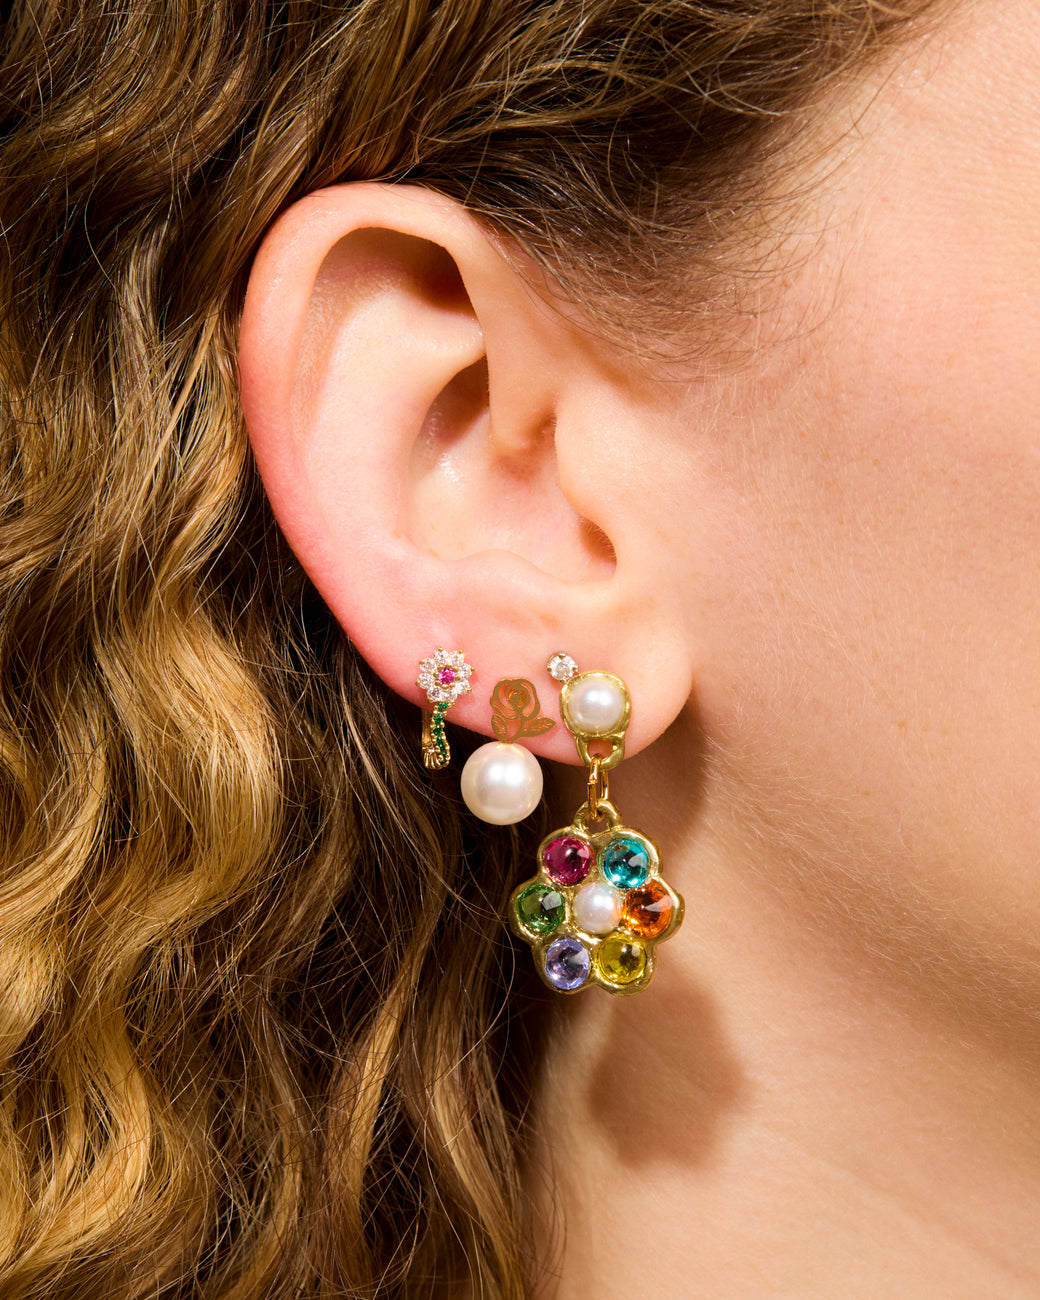 Say It With Flowers Earrings